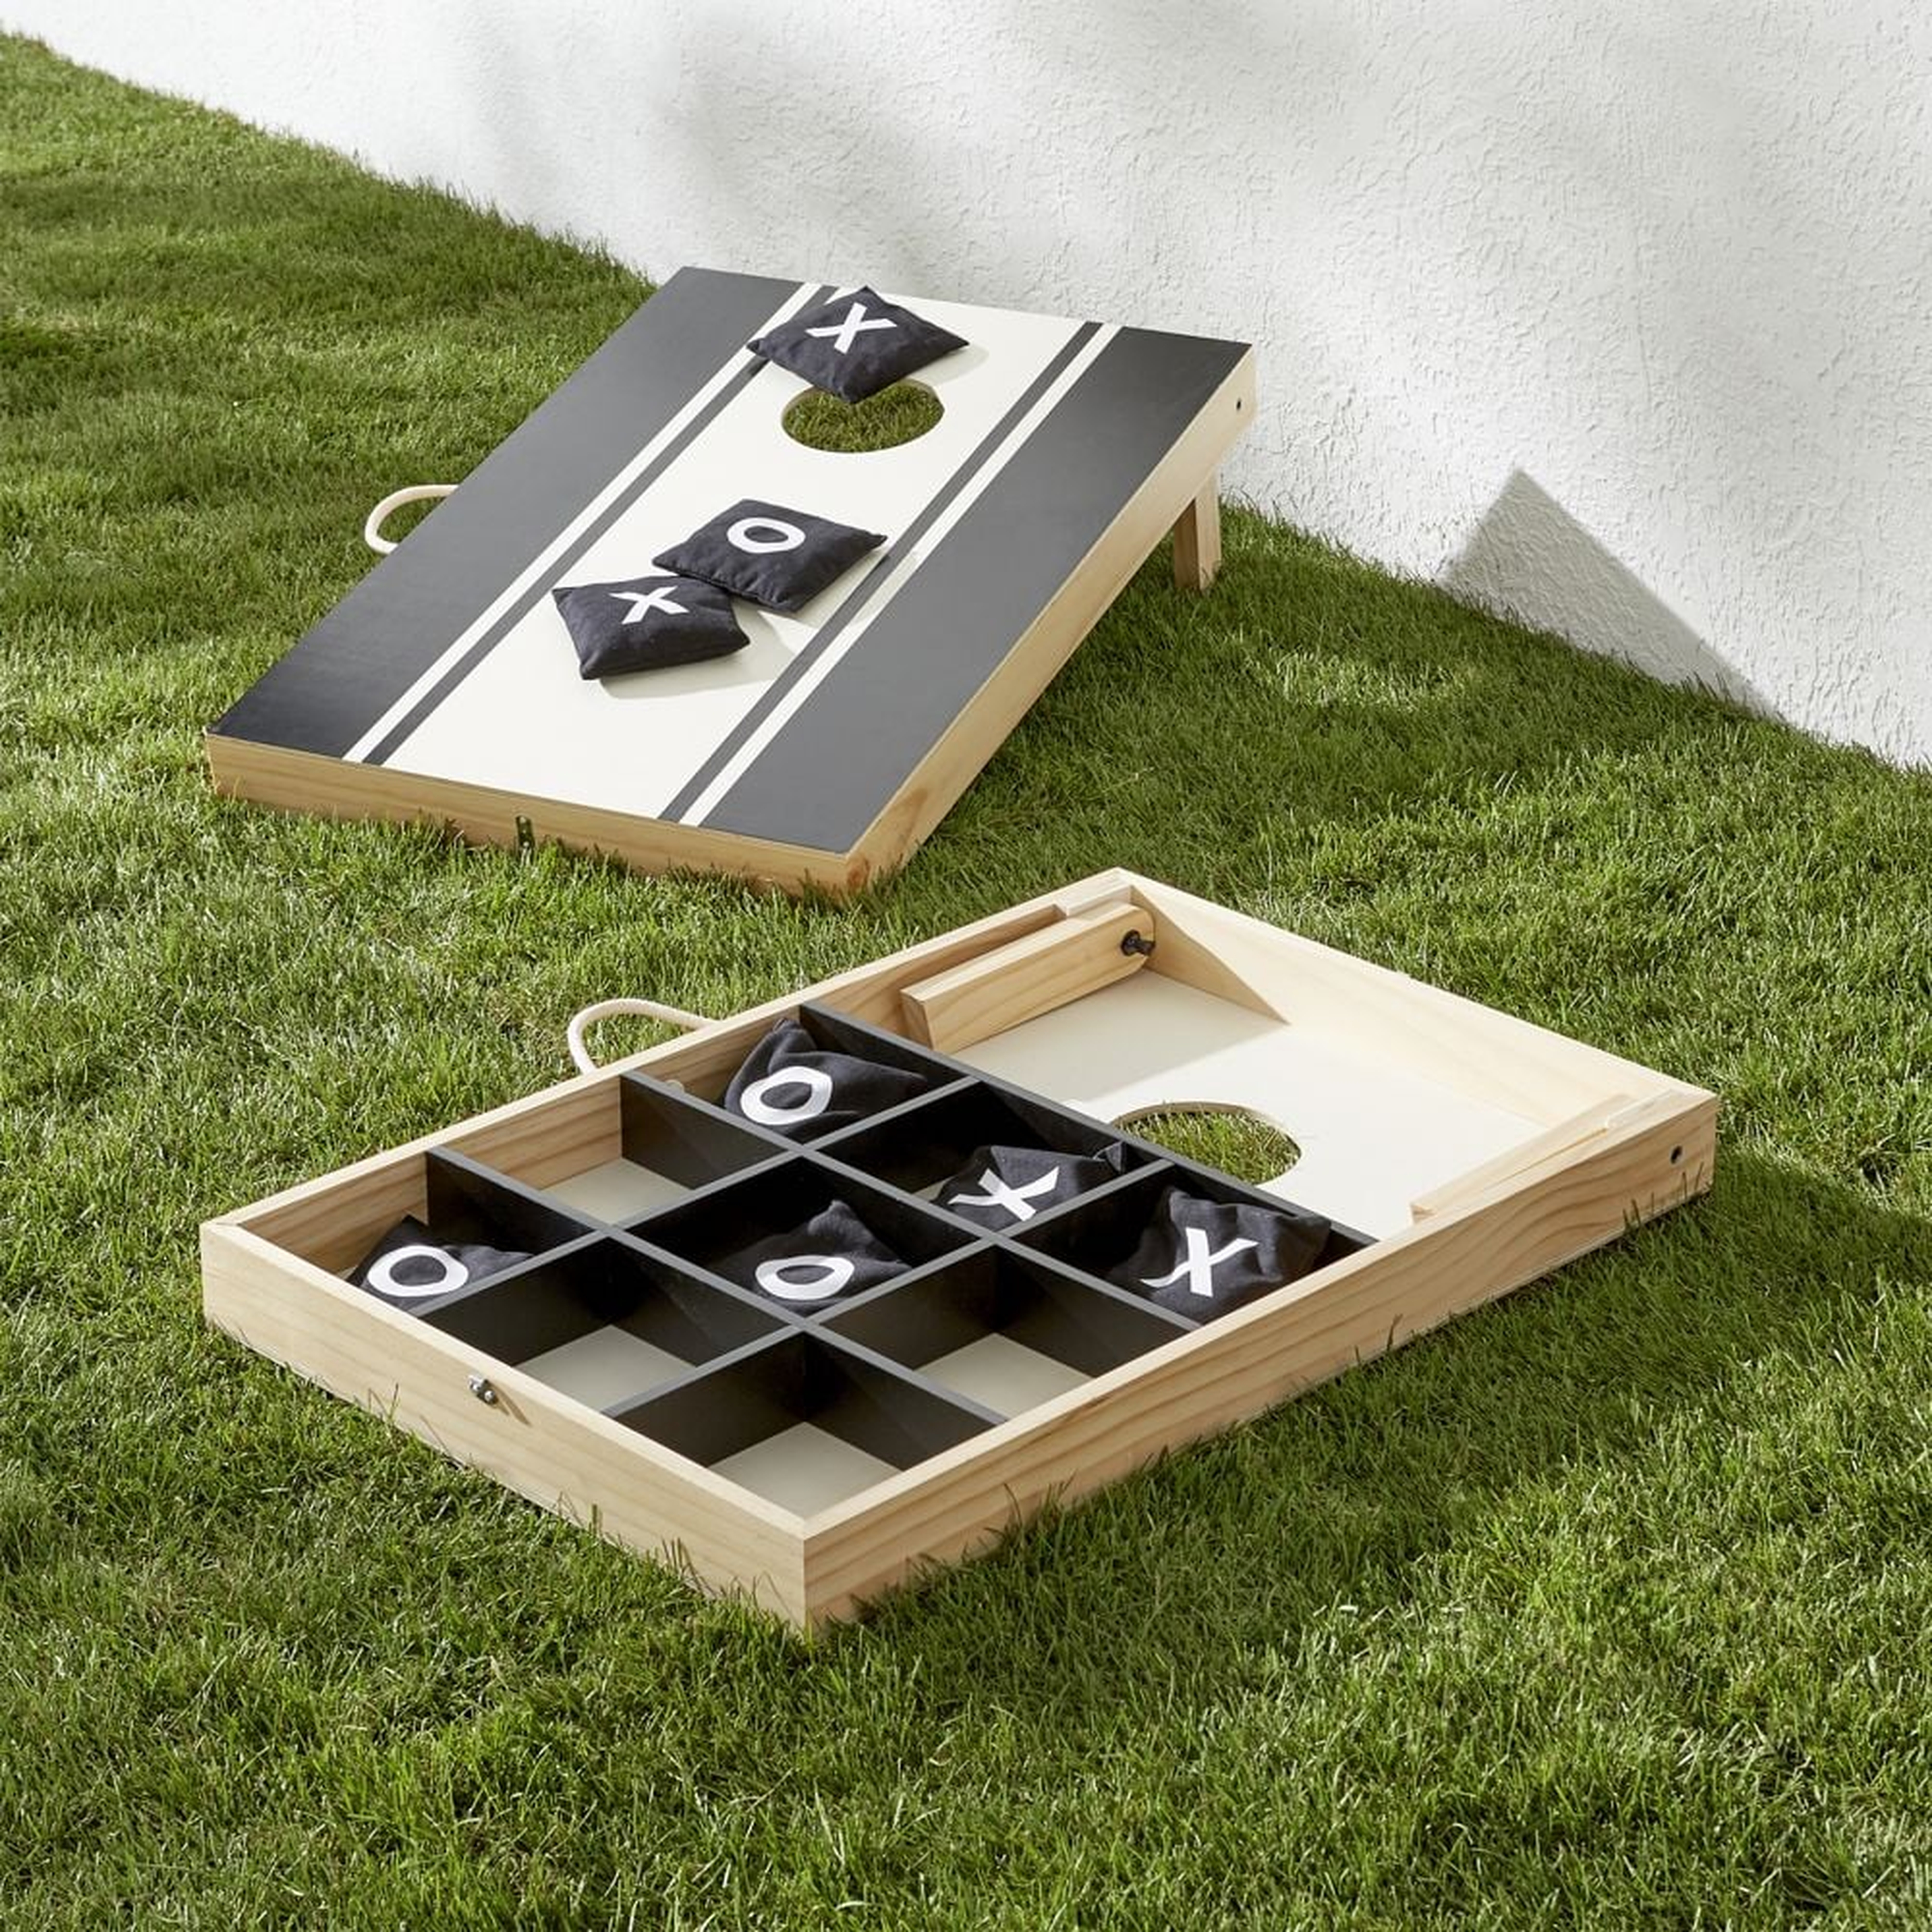 2-in-1 Bean Bag Toss - Crate and Barrel